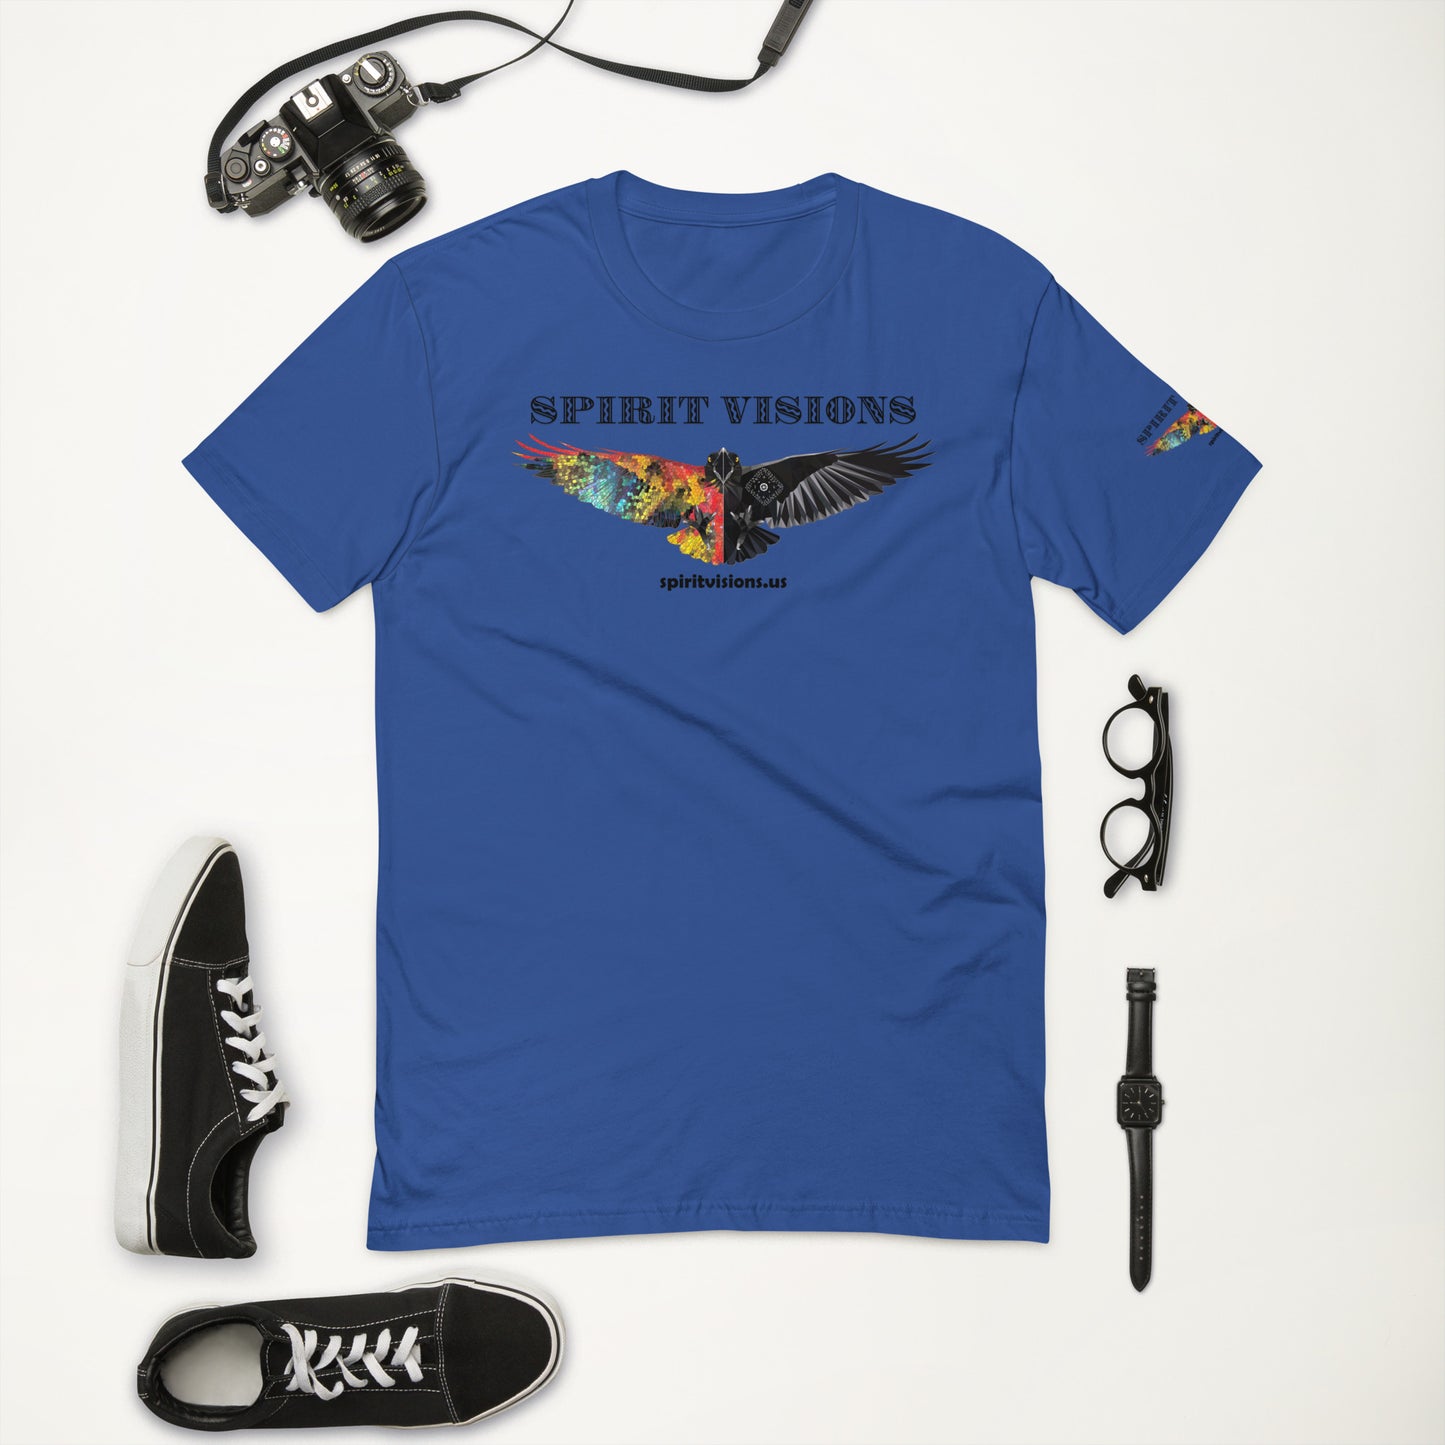 Mens Fitted T-shirt: Comic strip